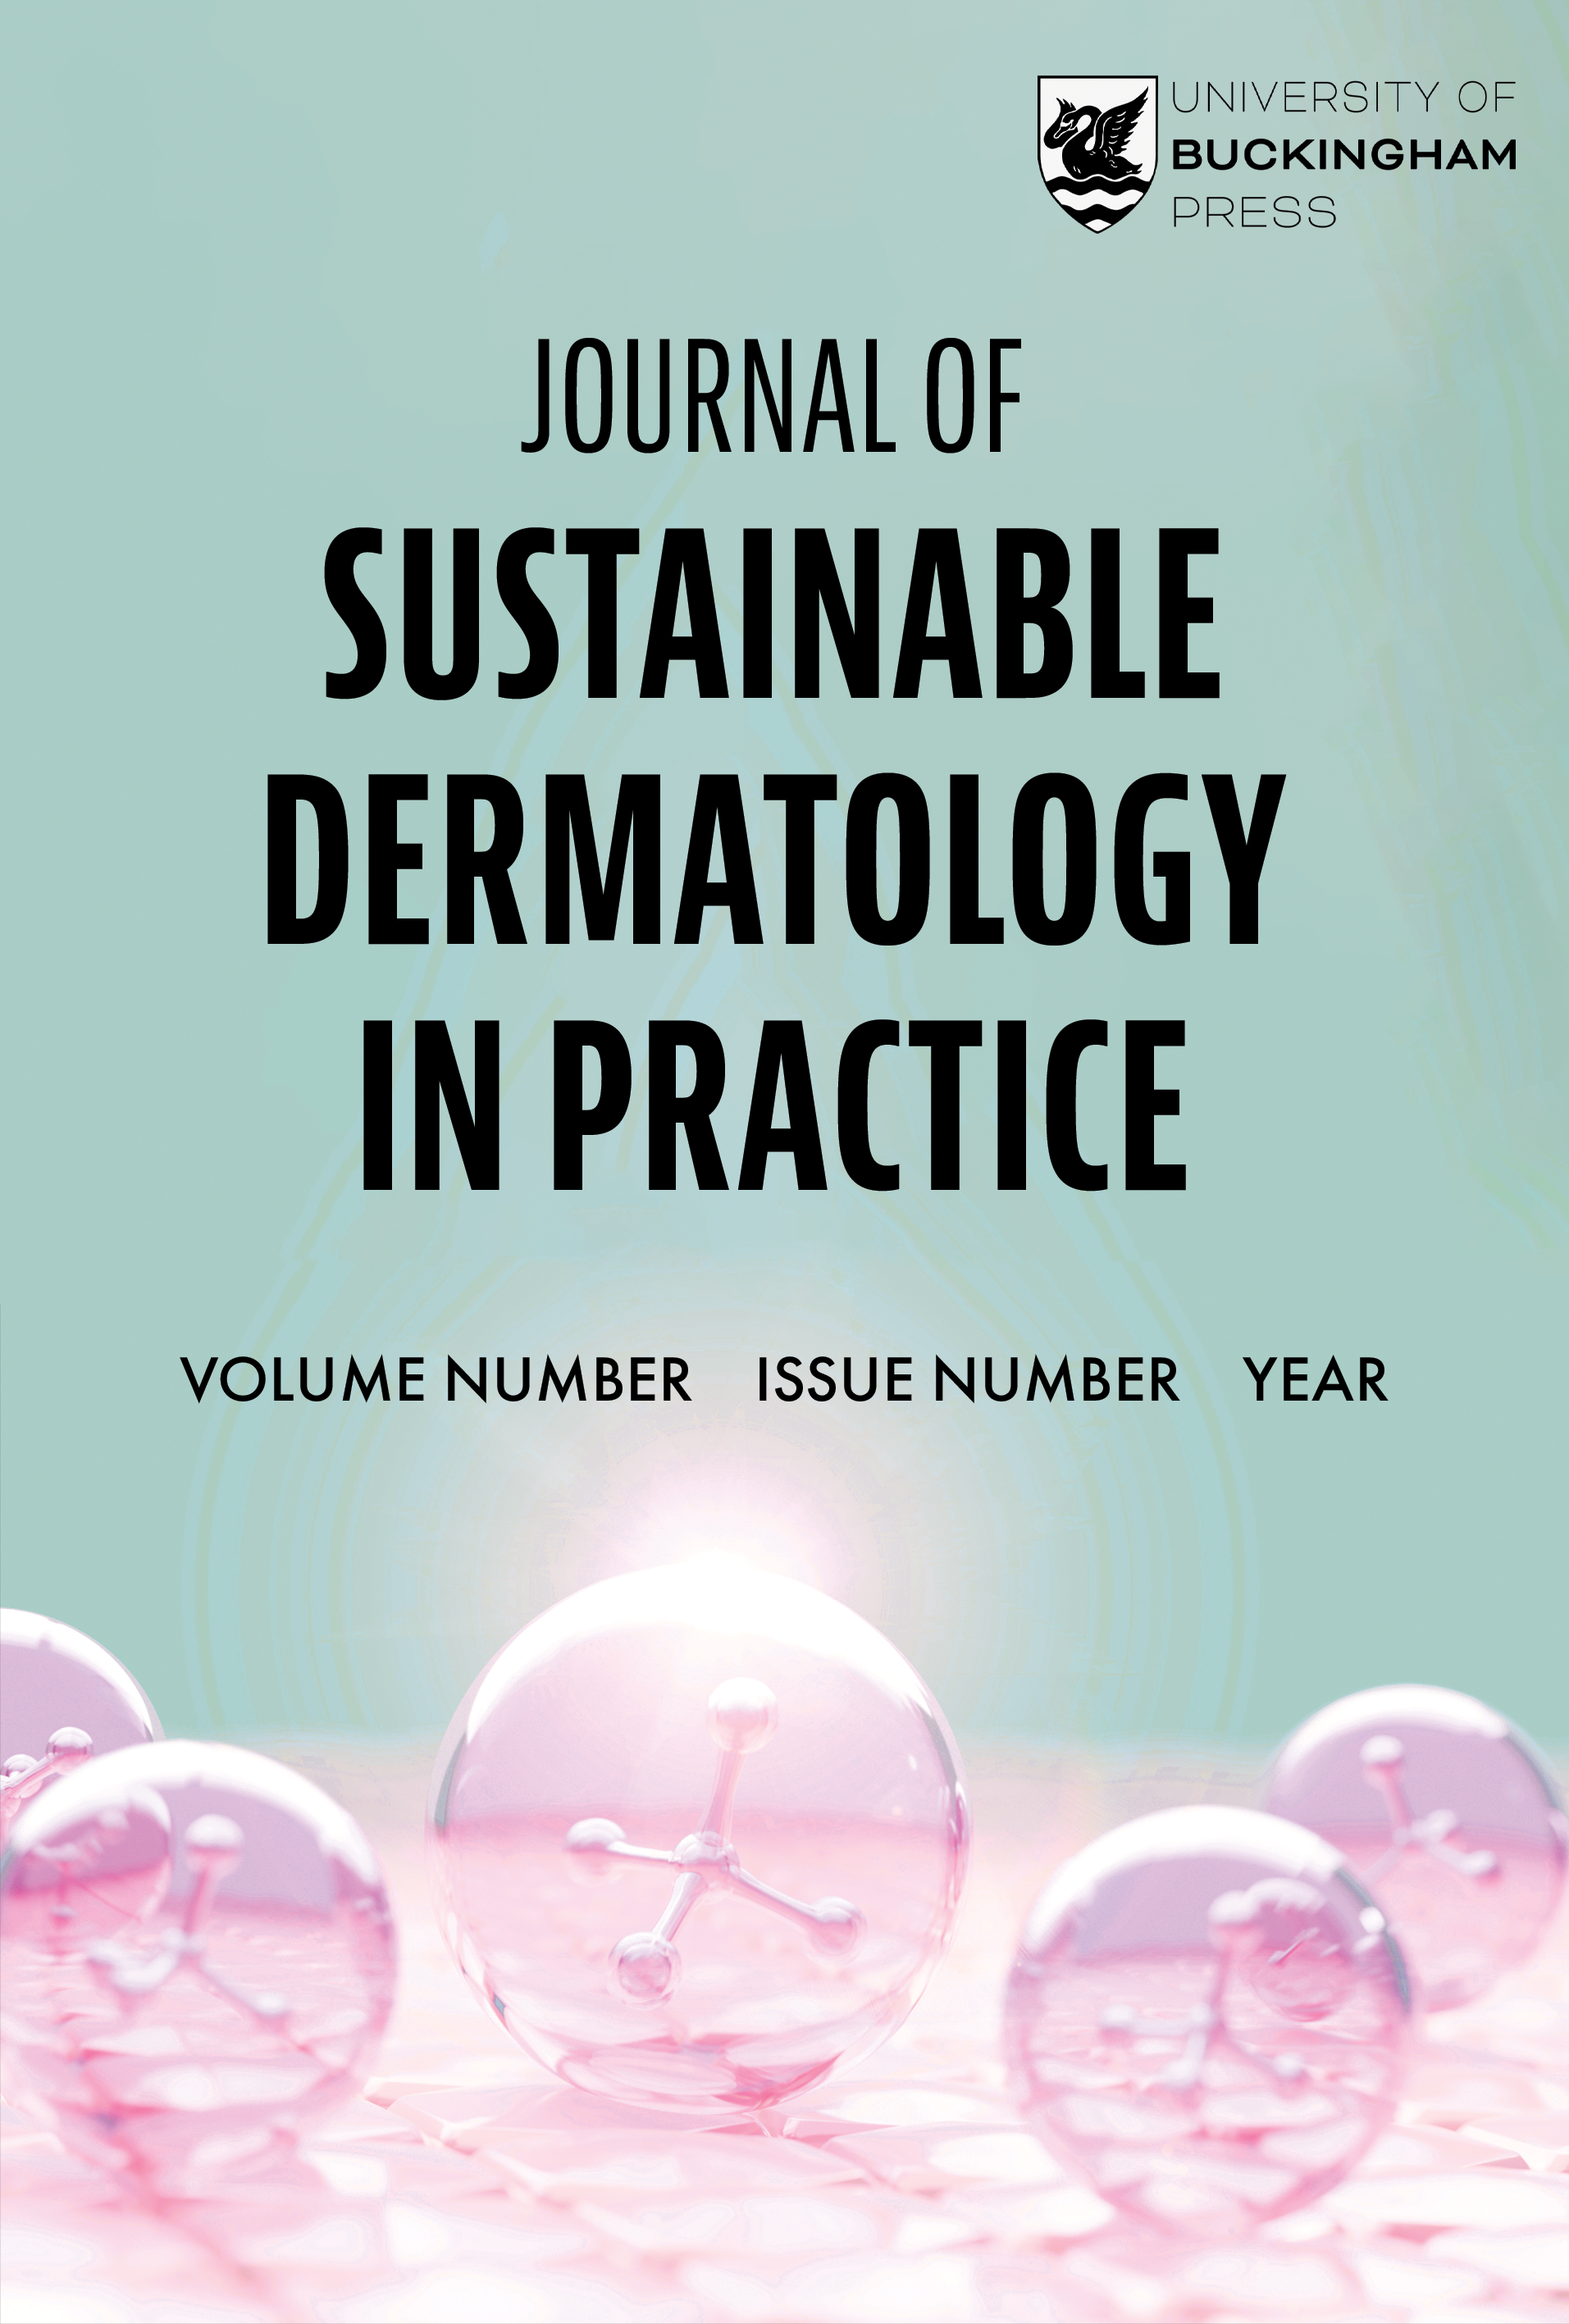 Journal of Sustainable Dermatology in Practice